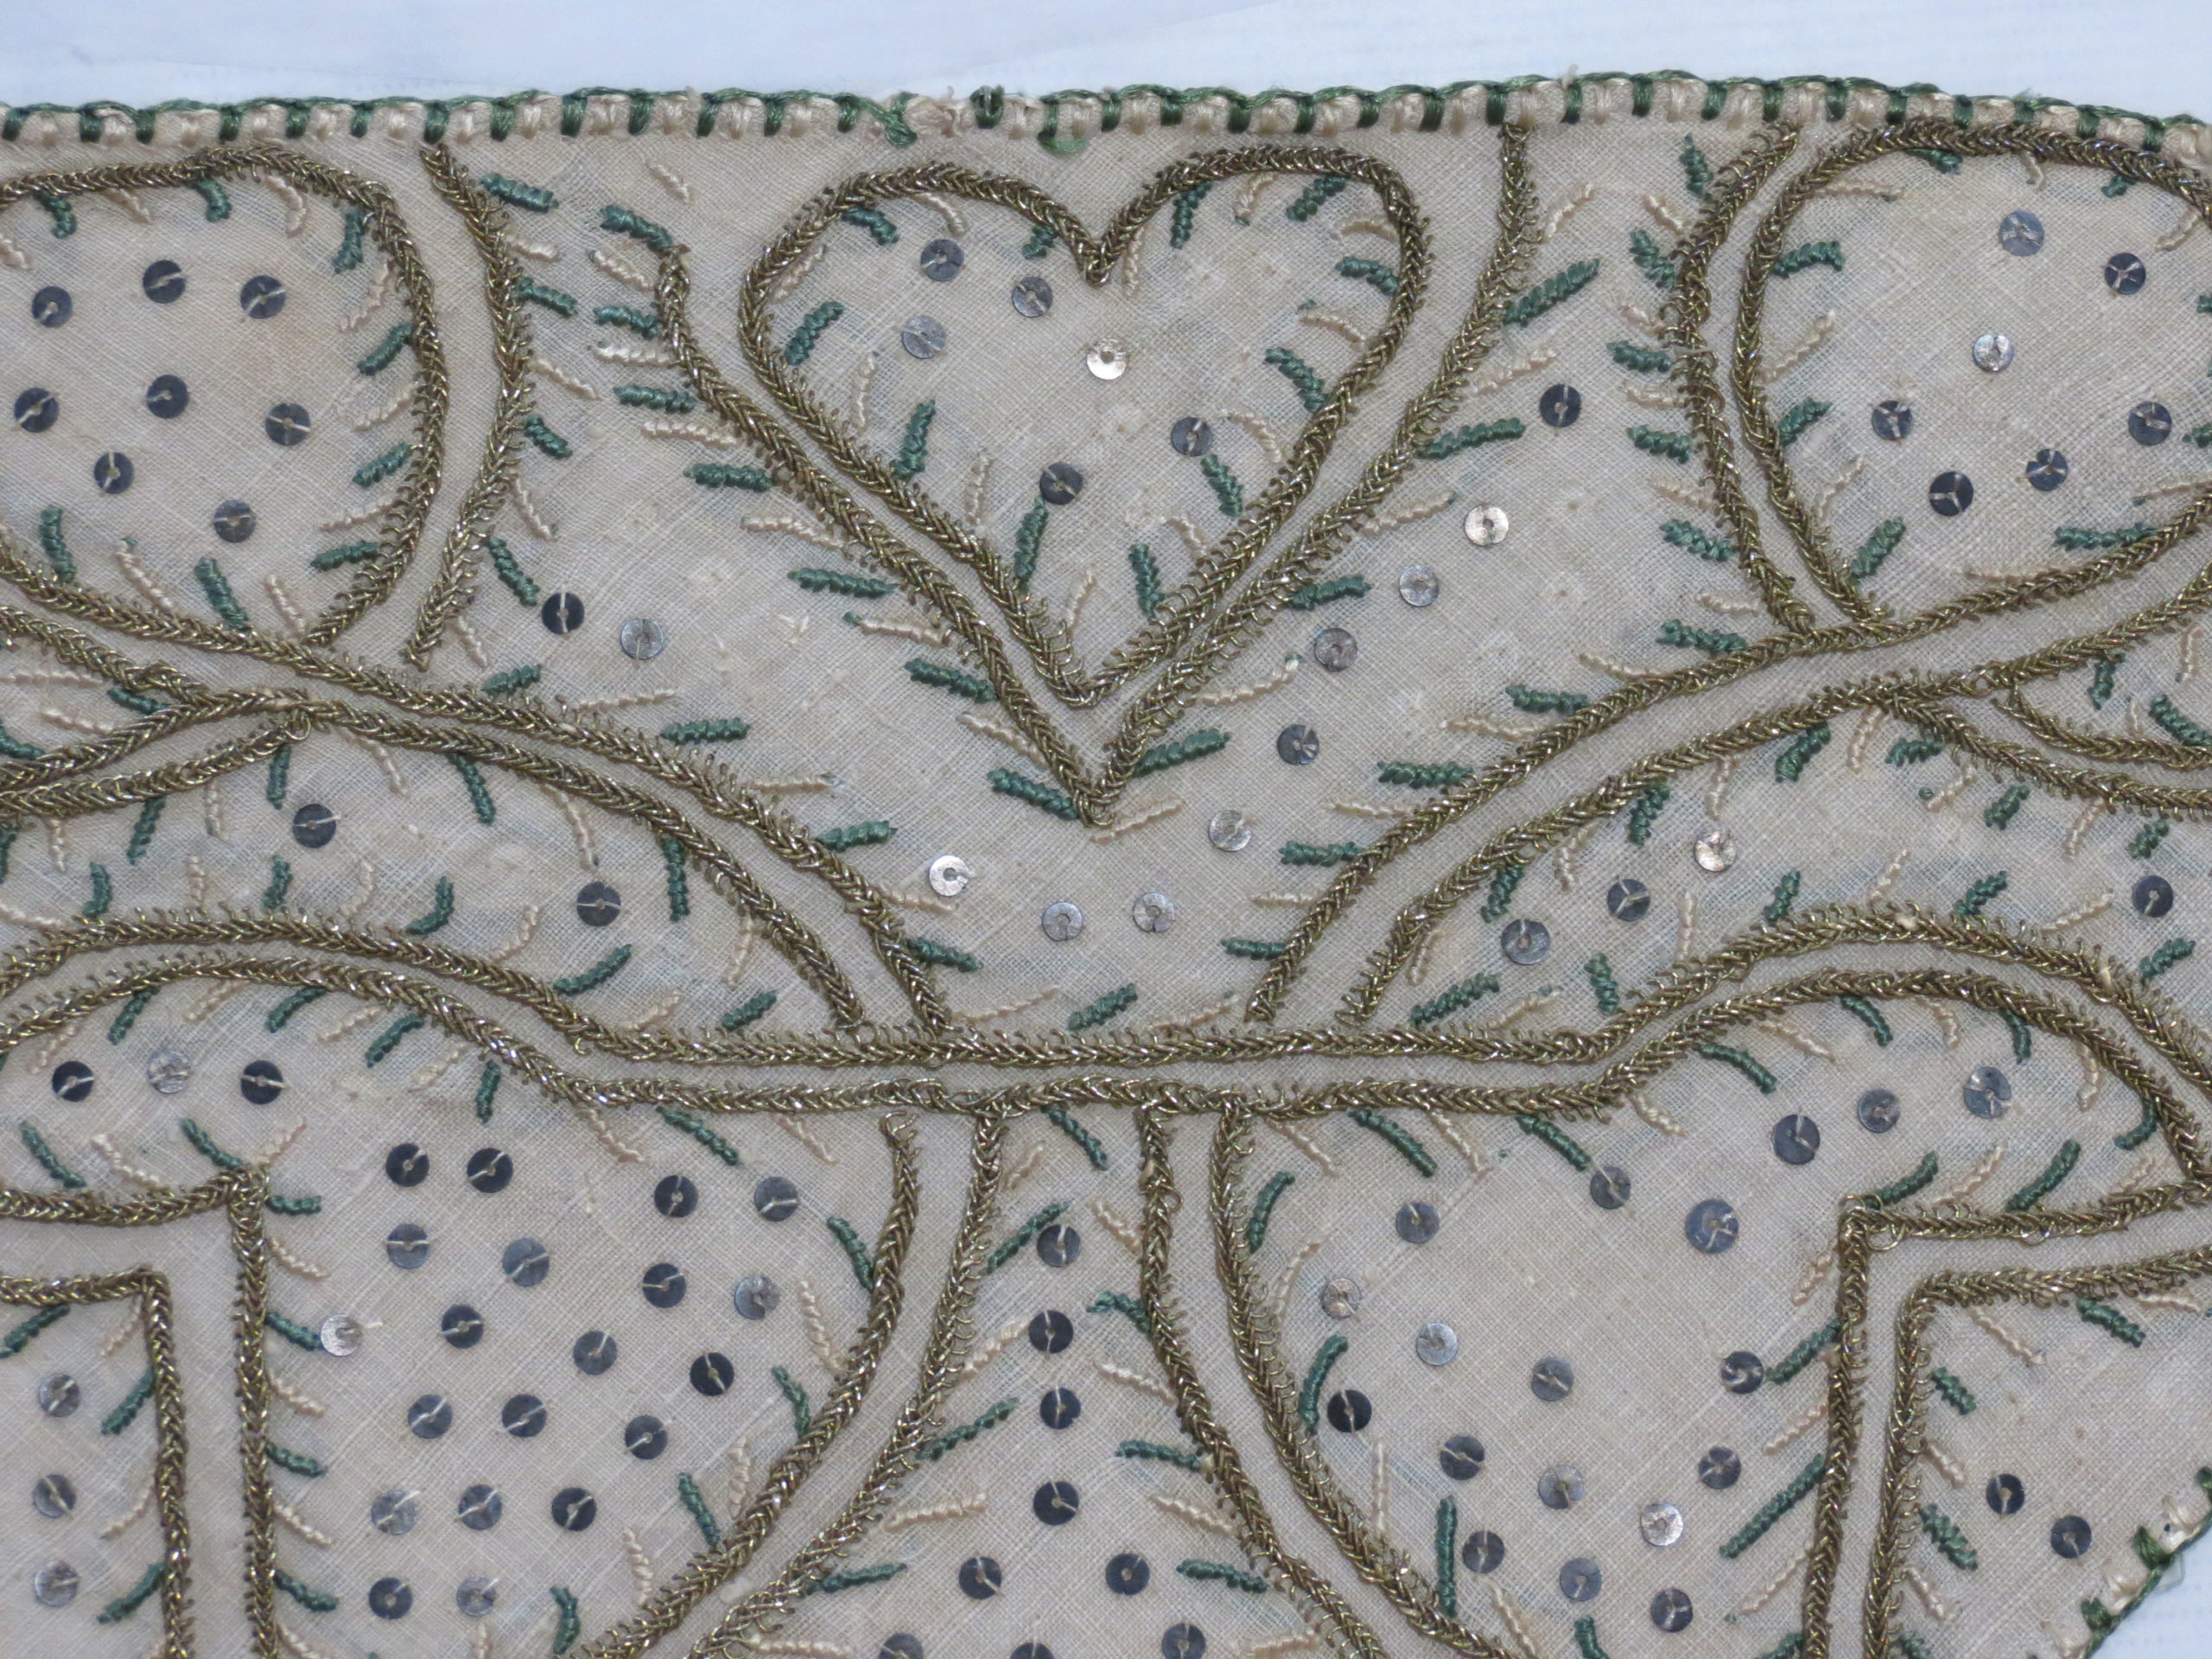 White linen forehead cloth embroidered with gold thread forming a heart, green and white silk embroidery, metal spangles.